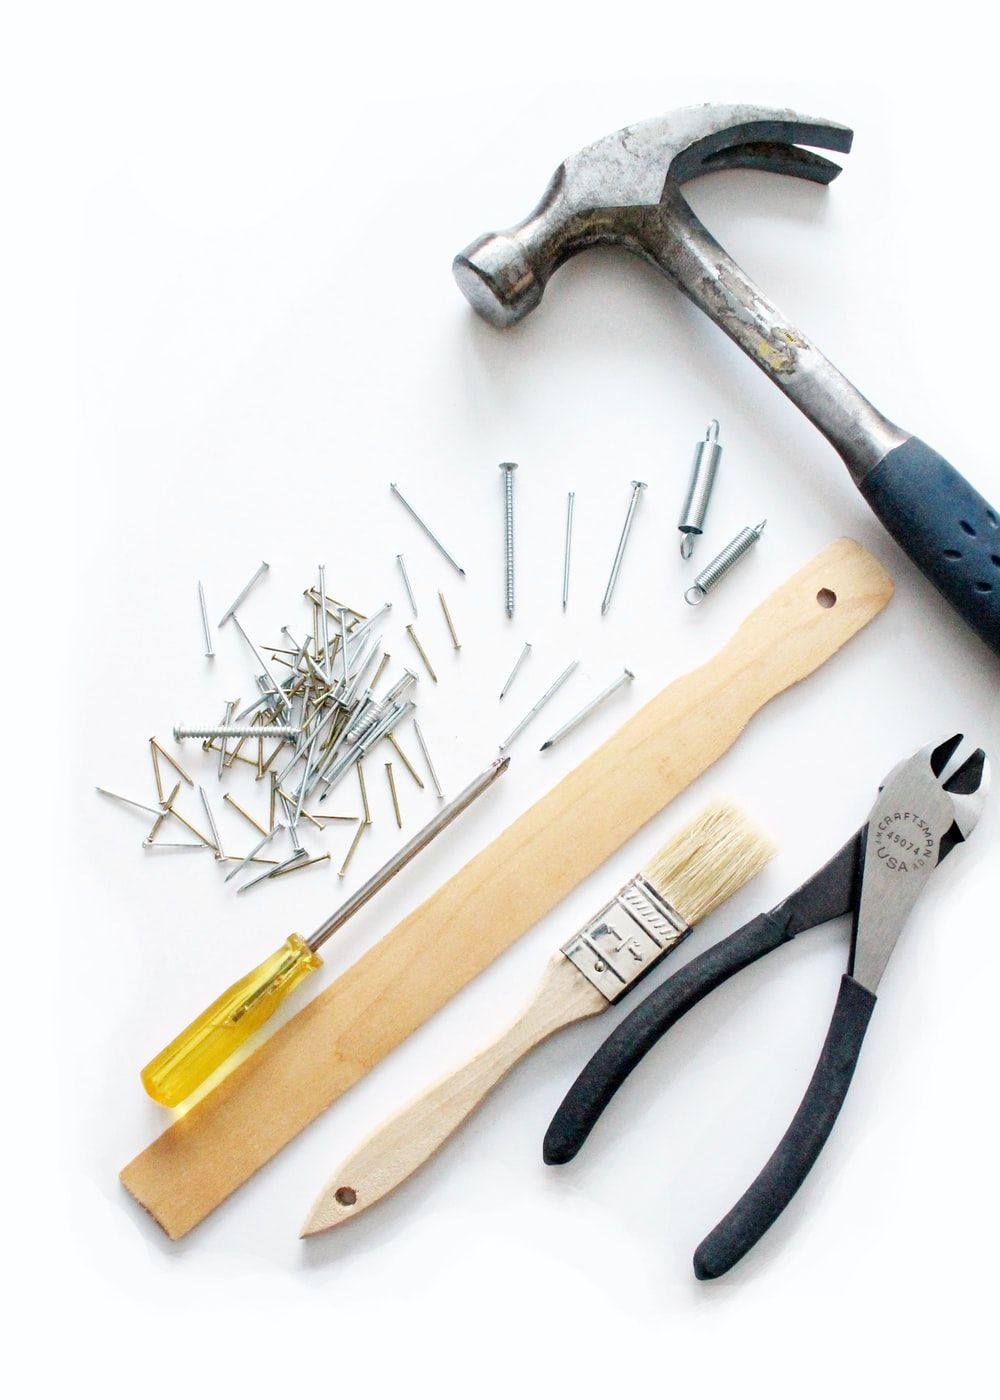 Handyman Picture [HD]. Download Free Image